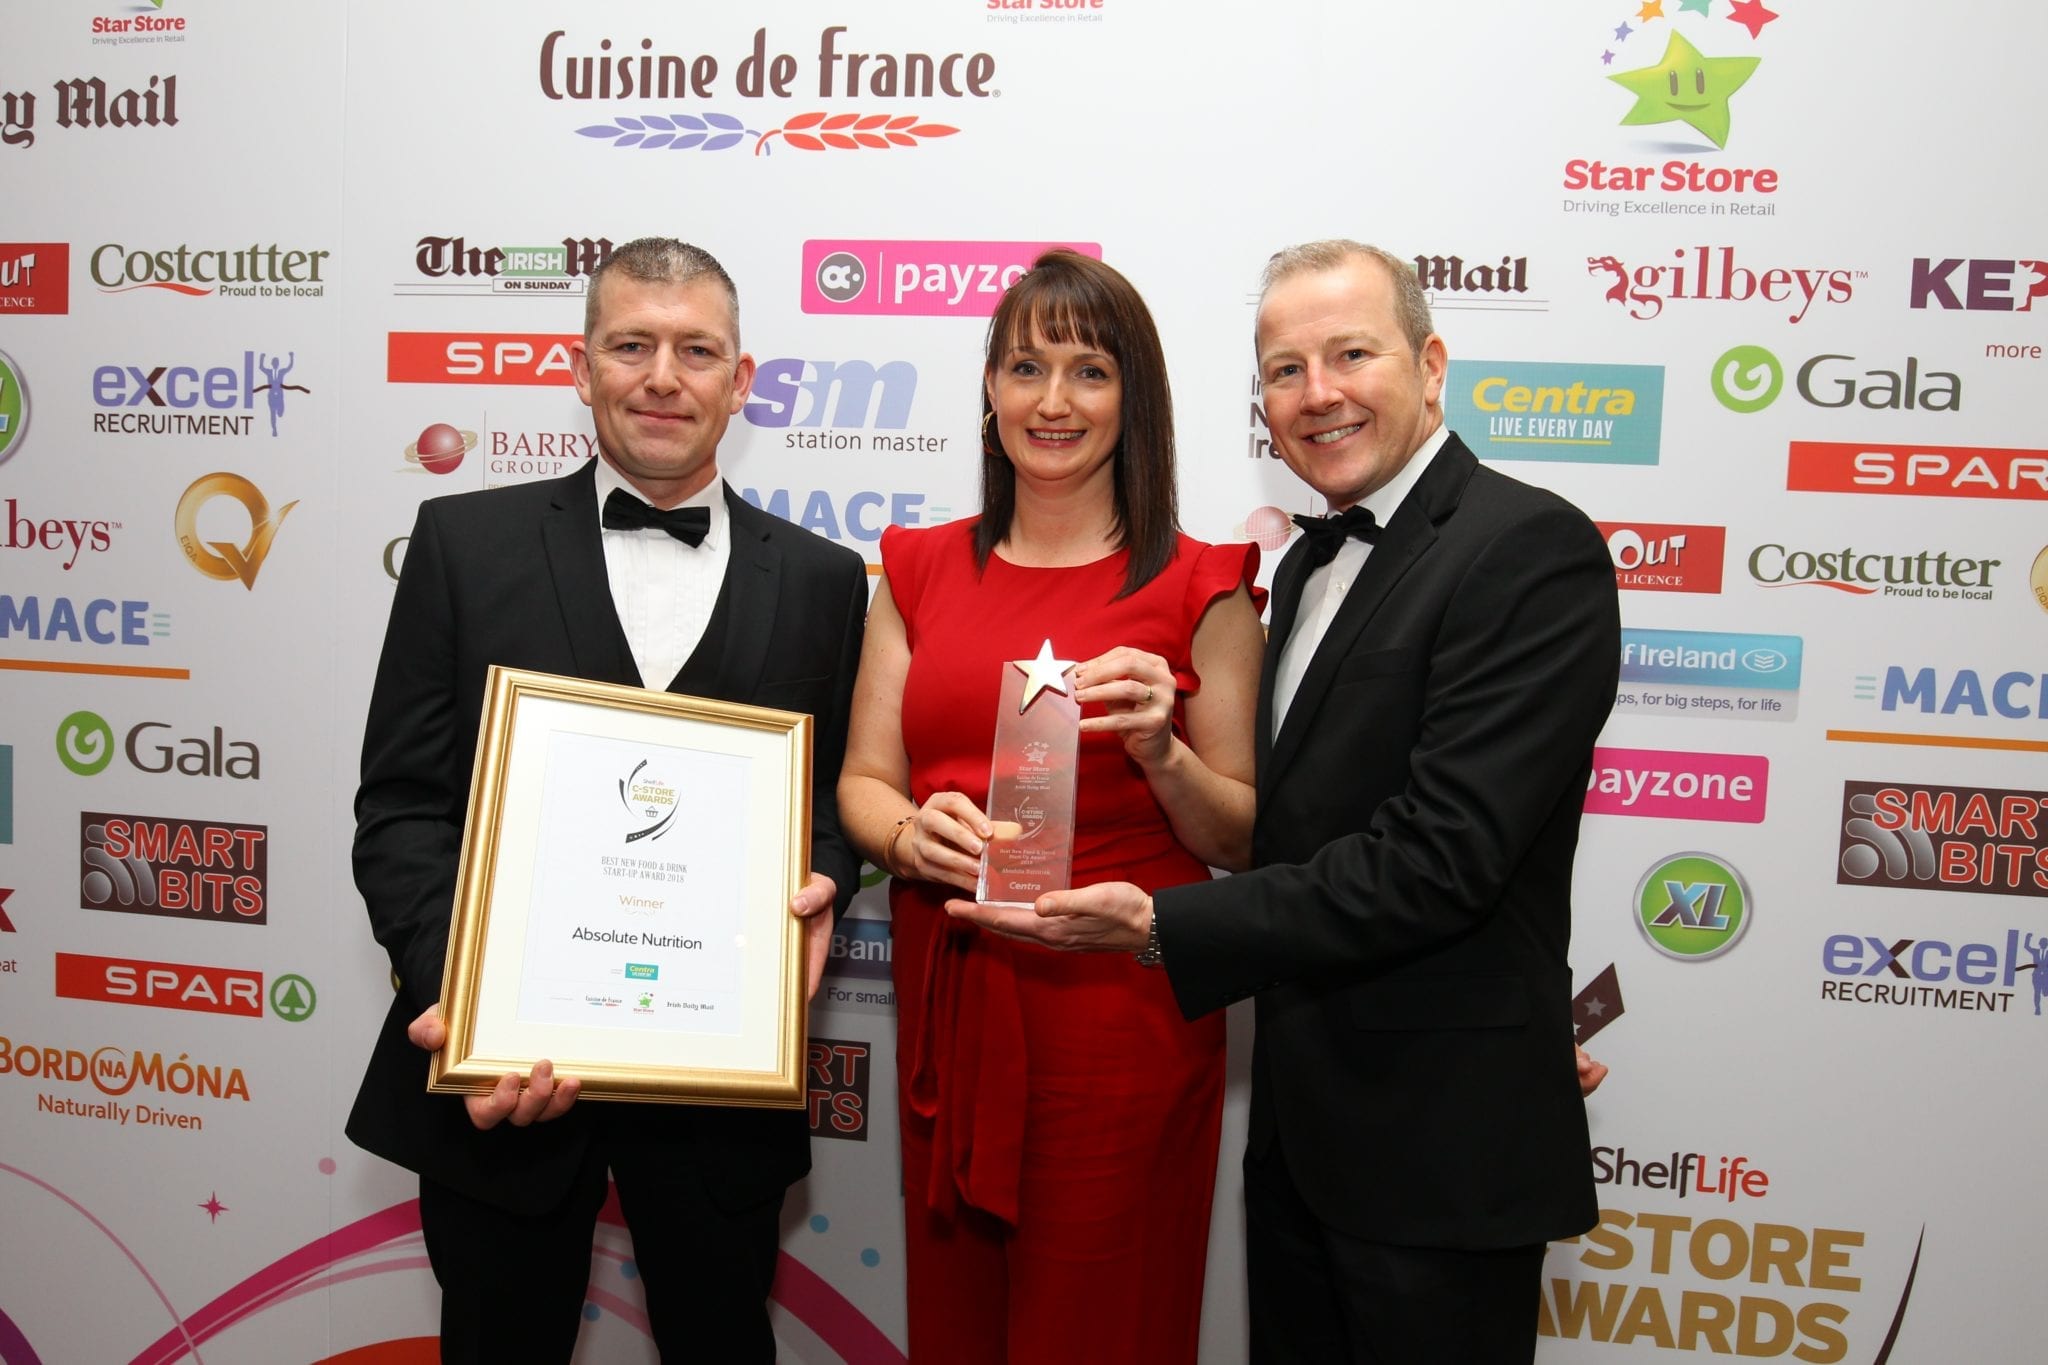 James Davey and Jo Davey of Absolute Nutrition accept the award for Best New Food and Drink Start-up 2019, presented by Dan Curtin, sales director, Centra